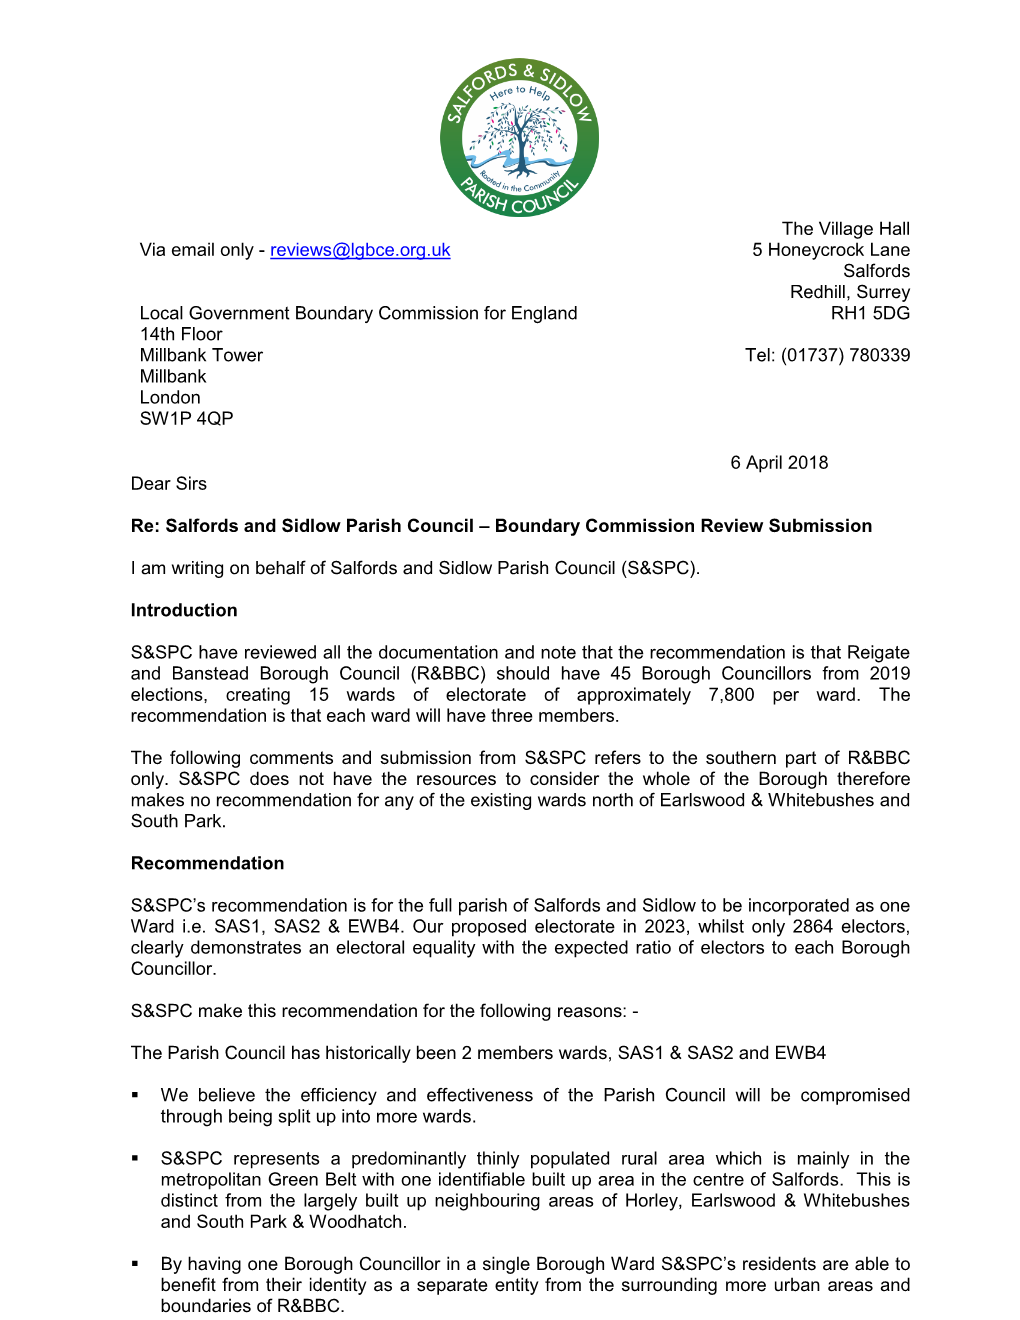 Salfords and Sidlow Parish Council – Boundary Commission Review Submission